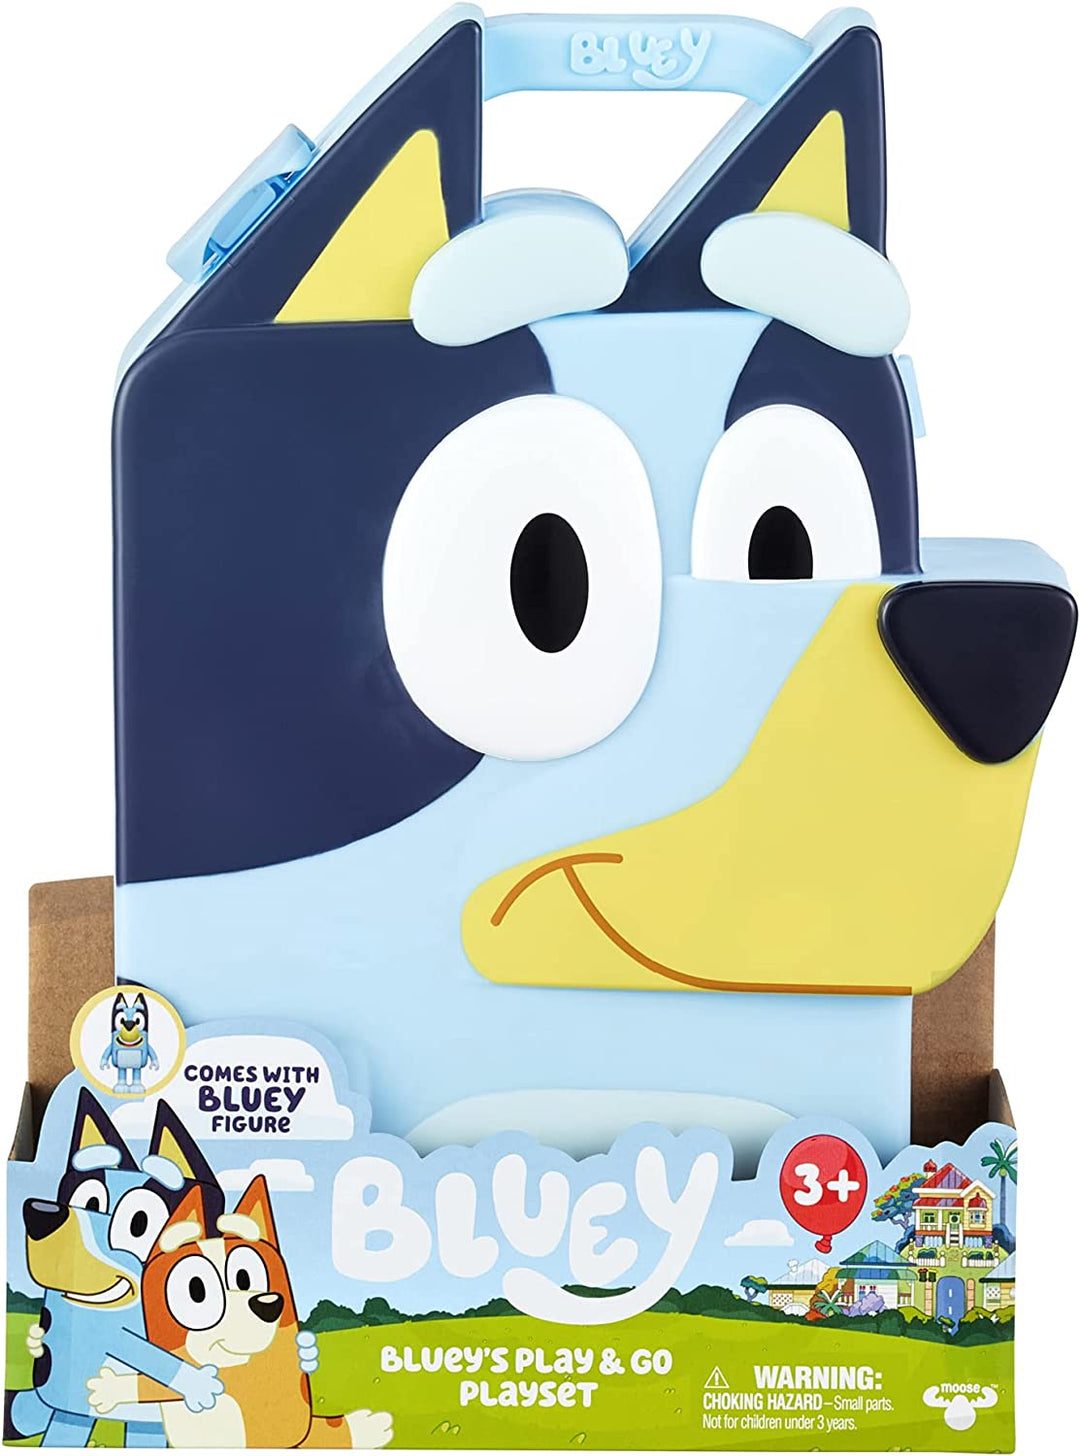 Bluey's Deluxe Collector Case Storage Display Case for Official Collectable Bluey 2.5-3 inch Character Action Figures